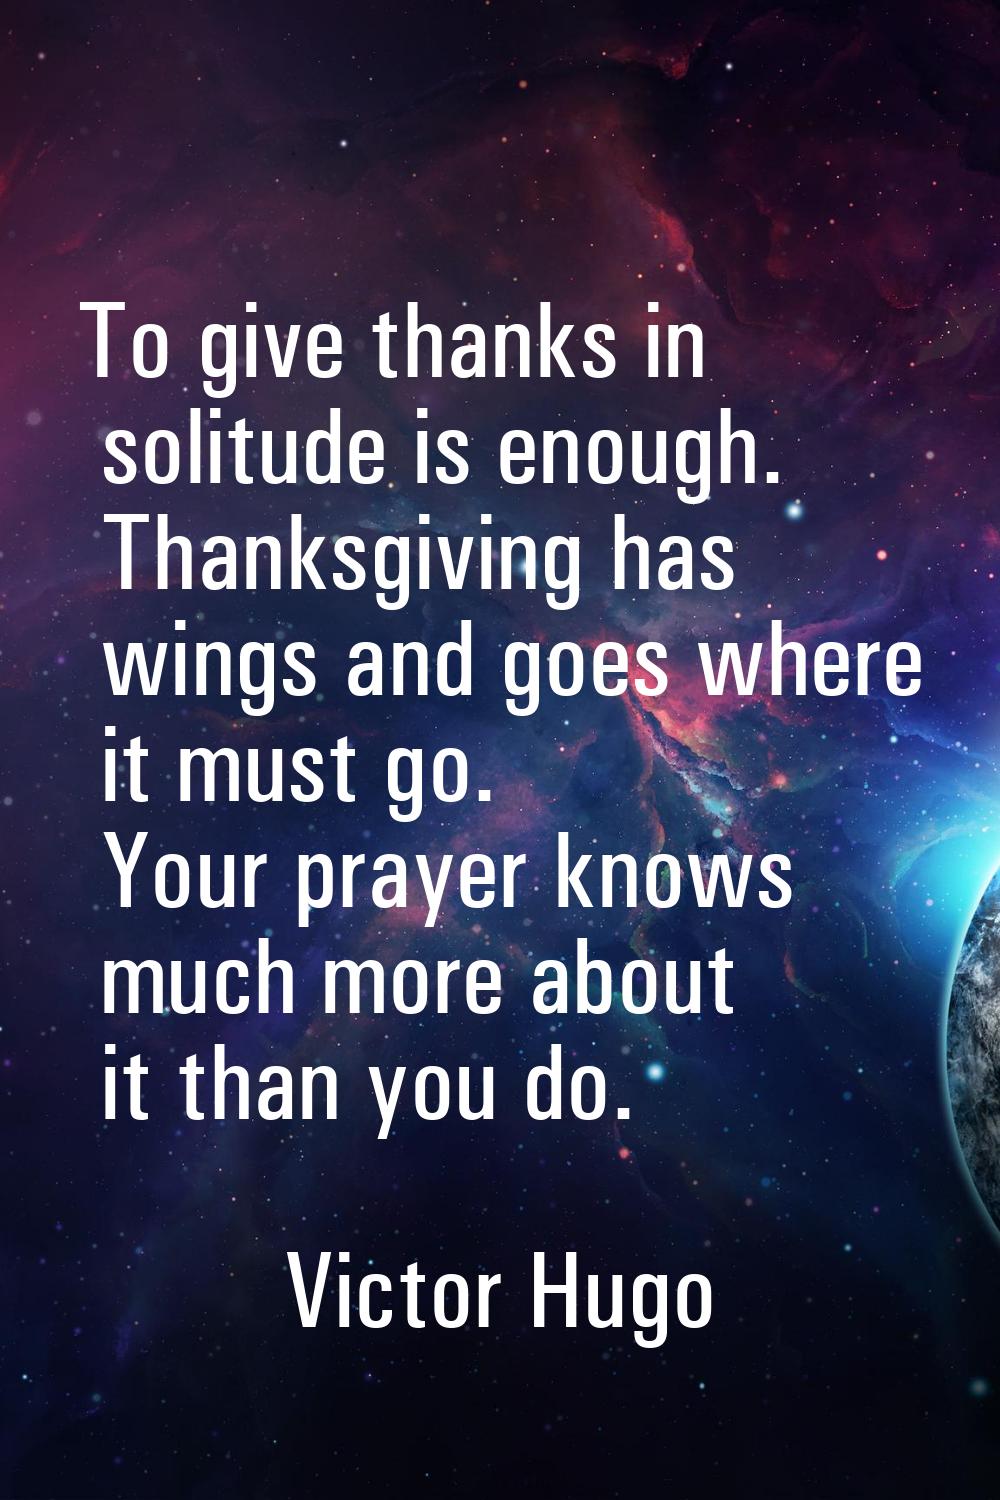 To give thanks in solitude is enough. Thanksgiving has wings and goes where it must go. Your prayer